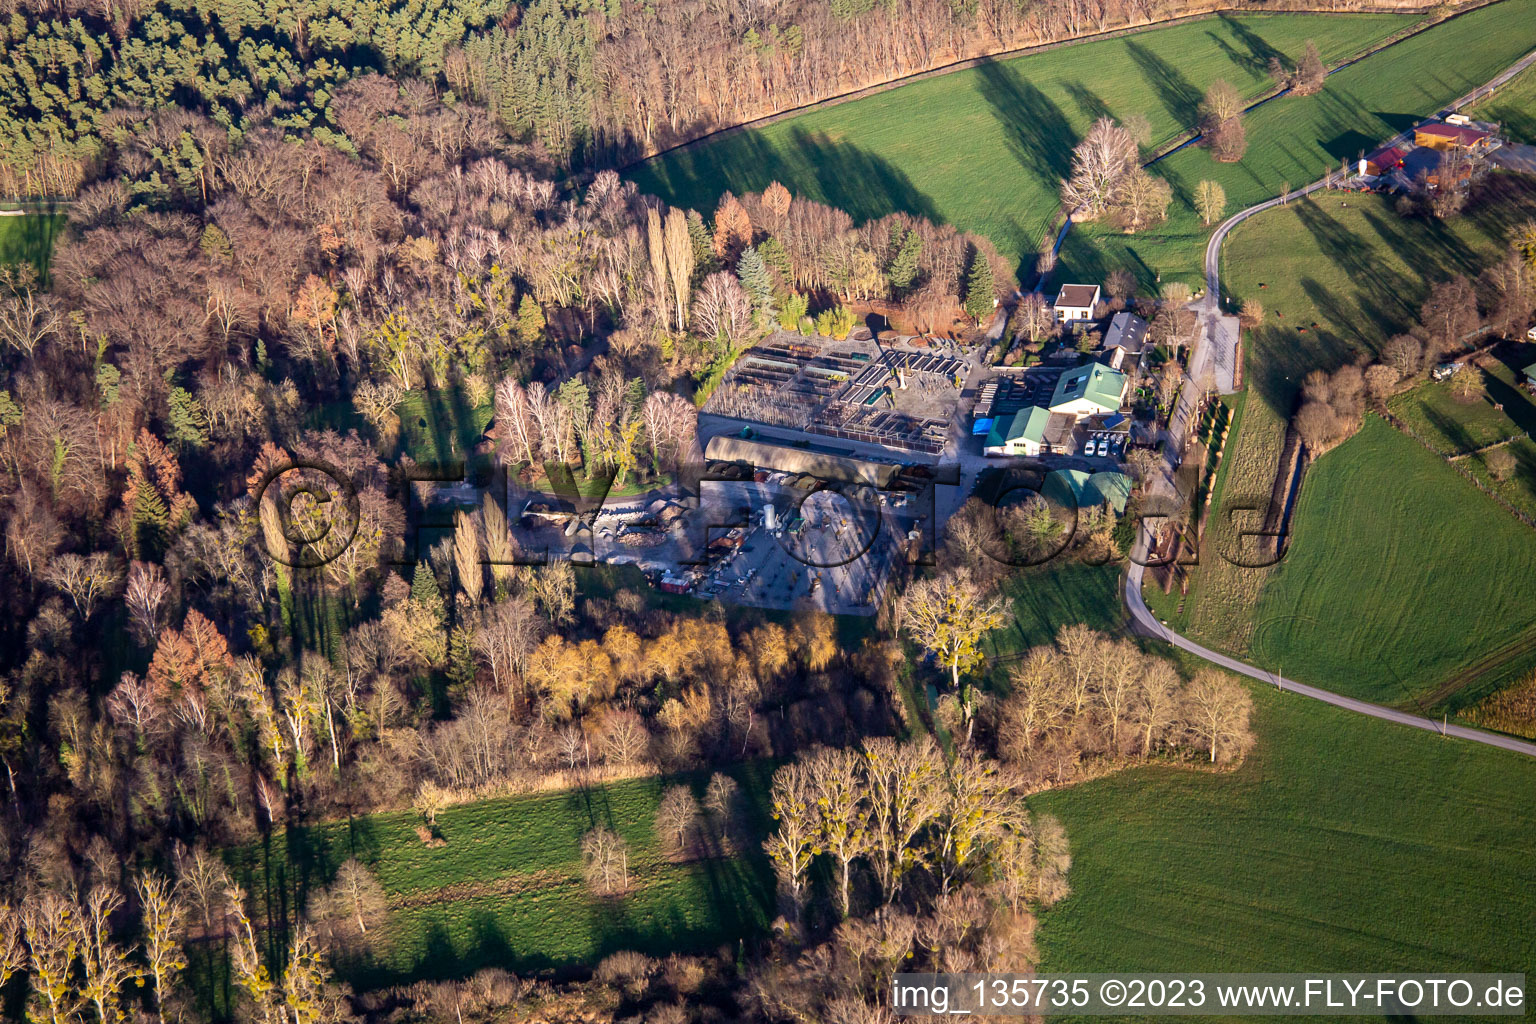 Oblique view of Bienwald tree nursery in Berg in the state Rhineland-Palatinate, Germany